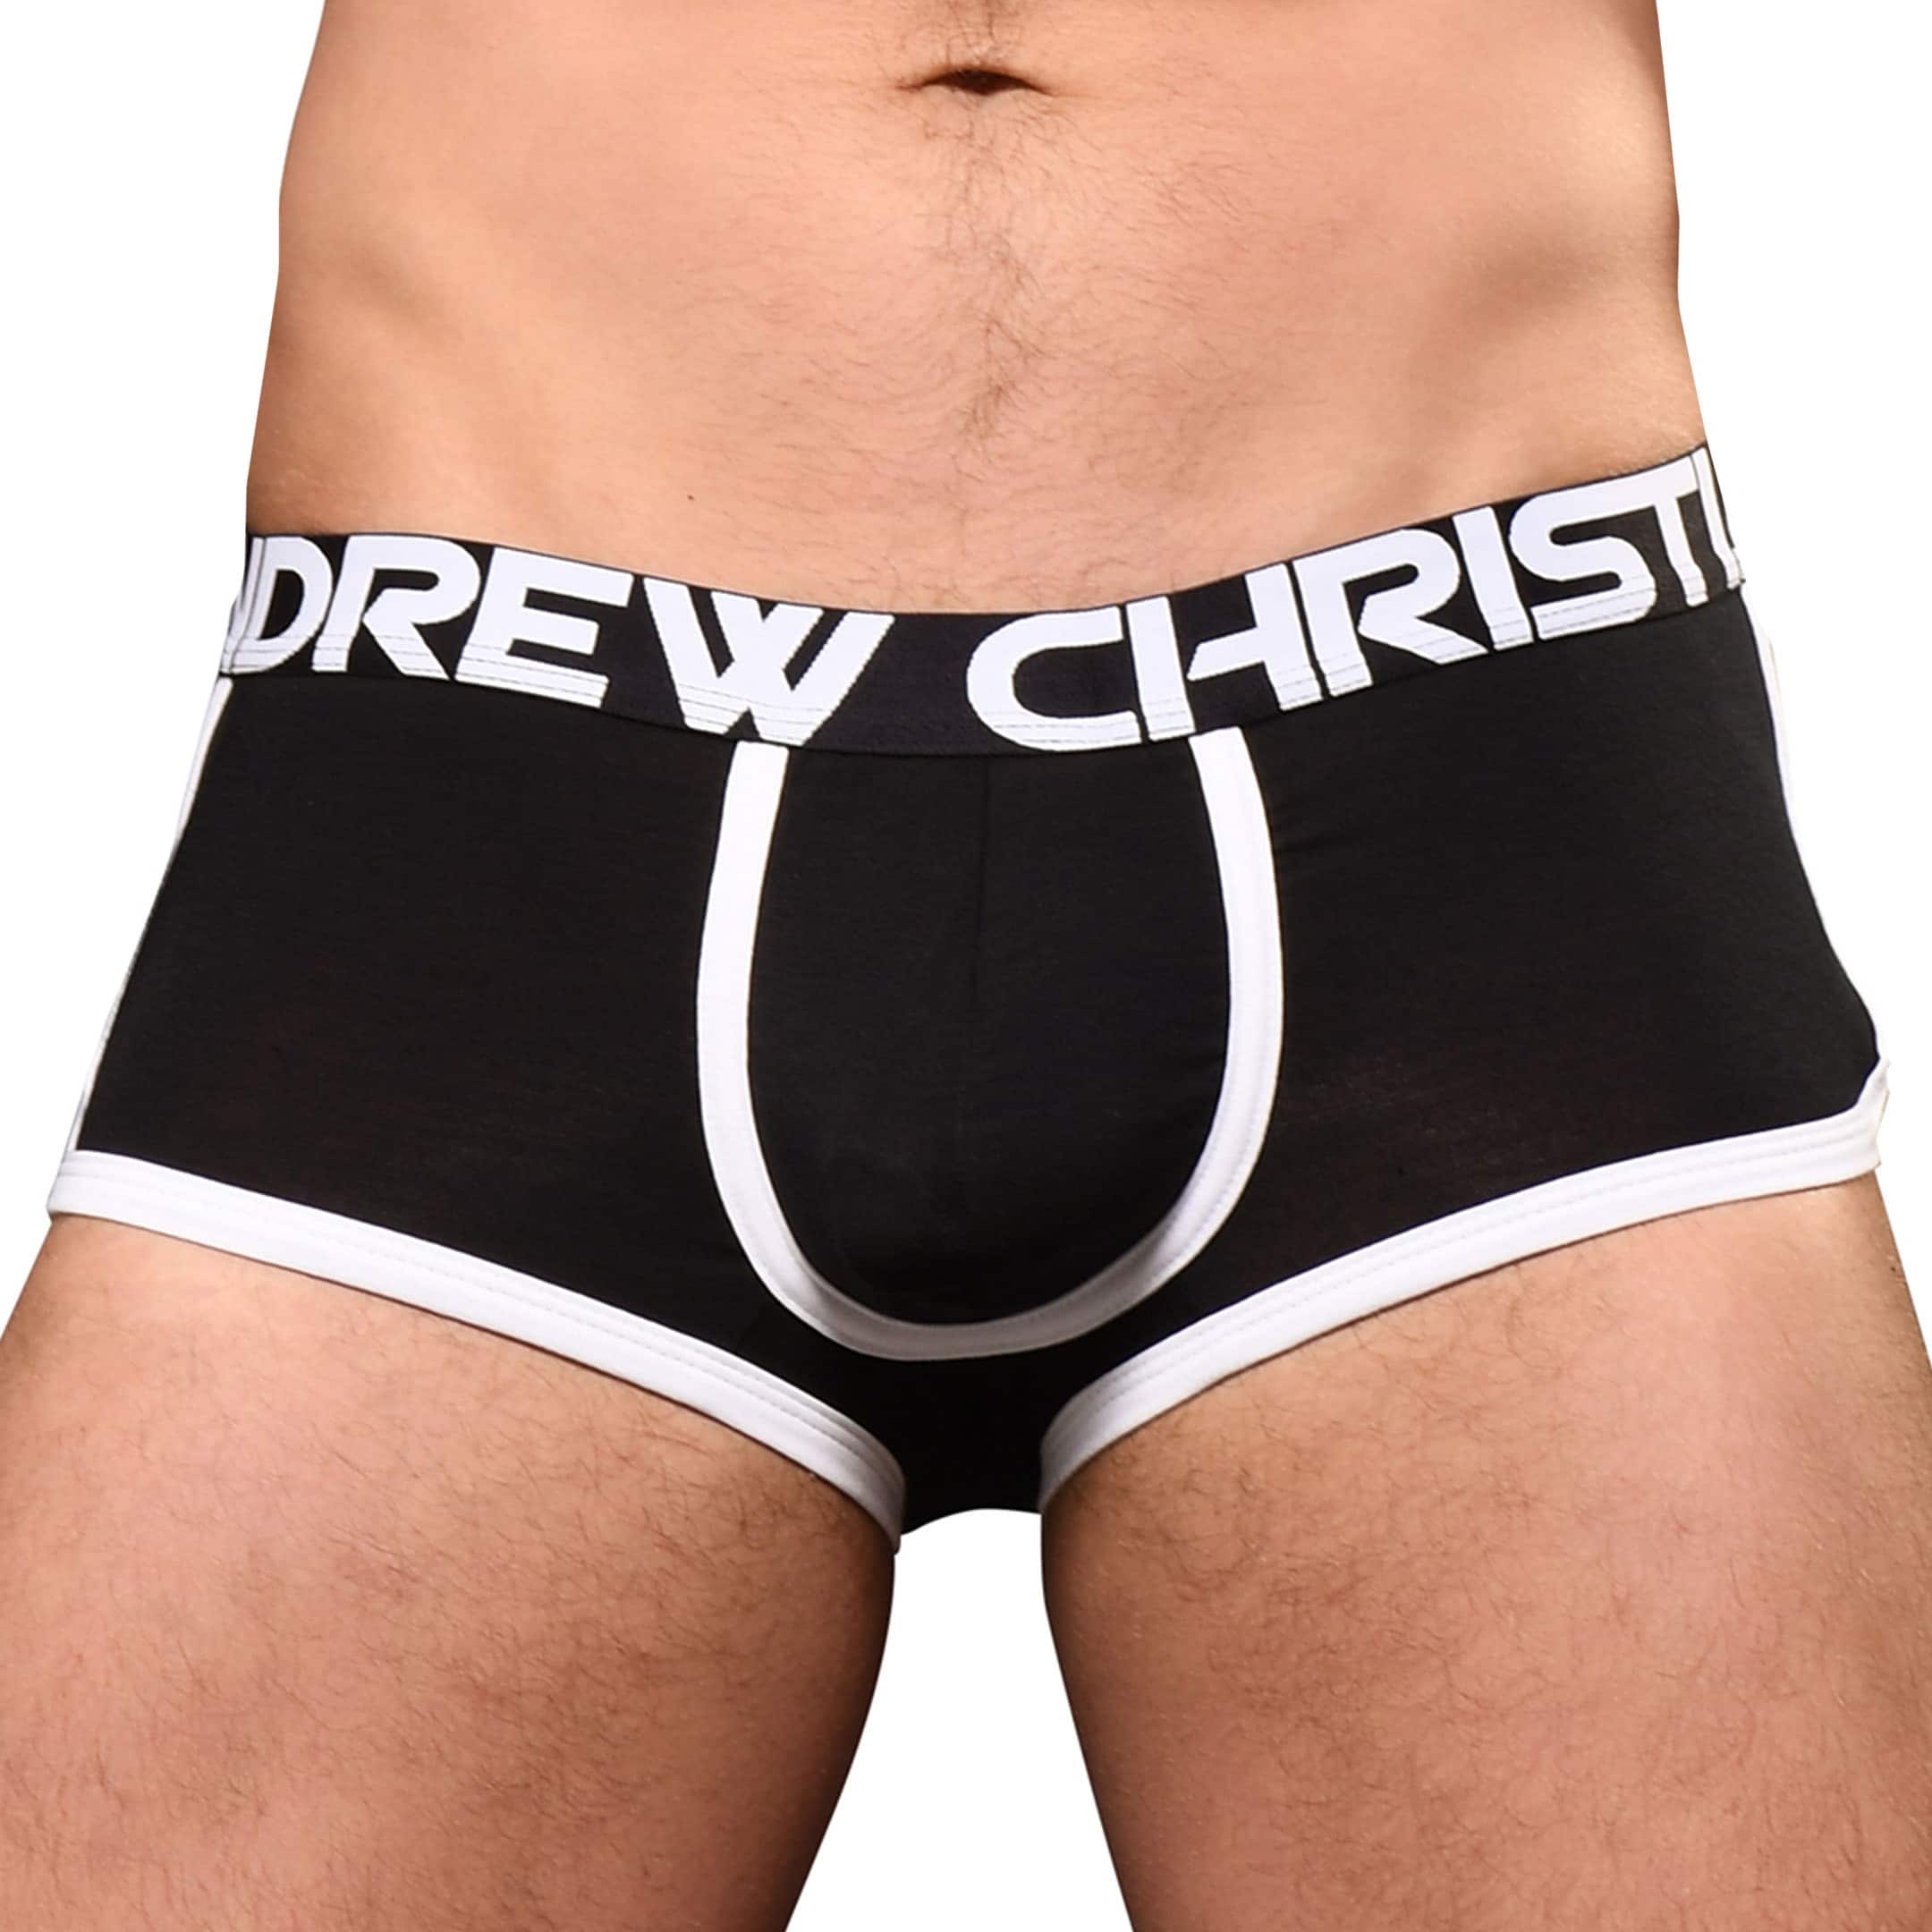 Andrew Christian CoolFlex Active Modal Trunks with Show-It - Black